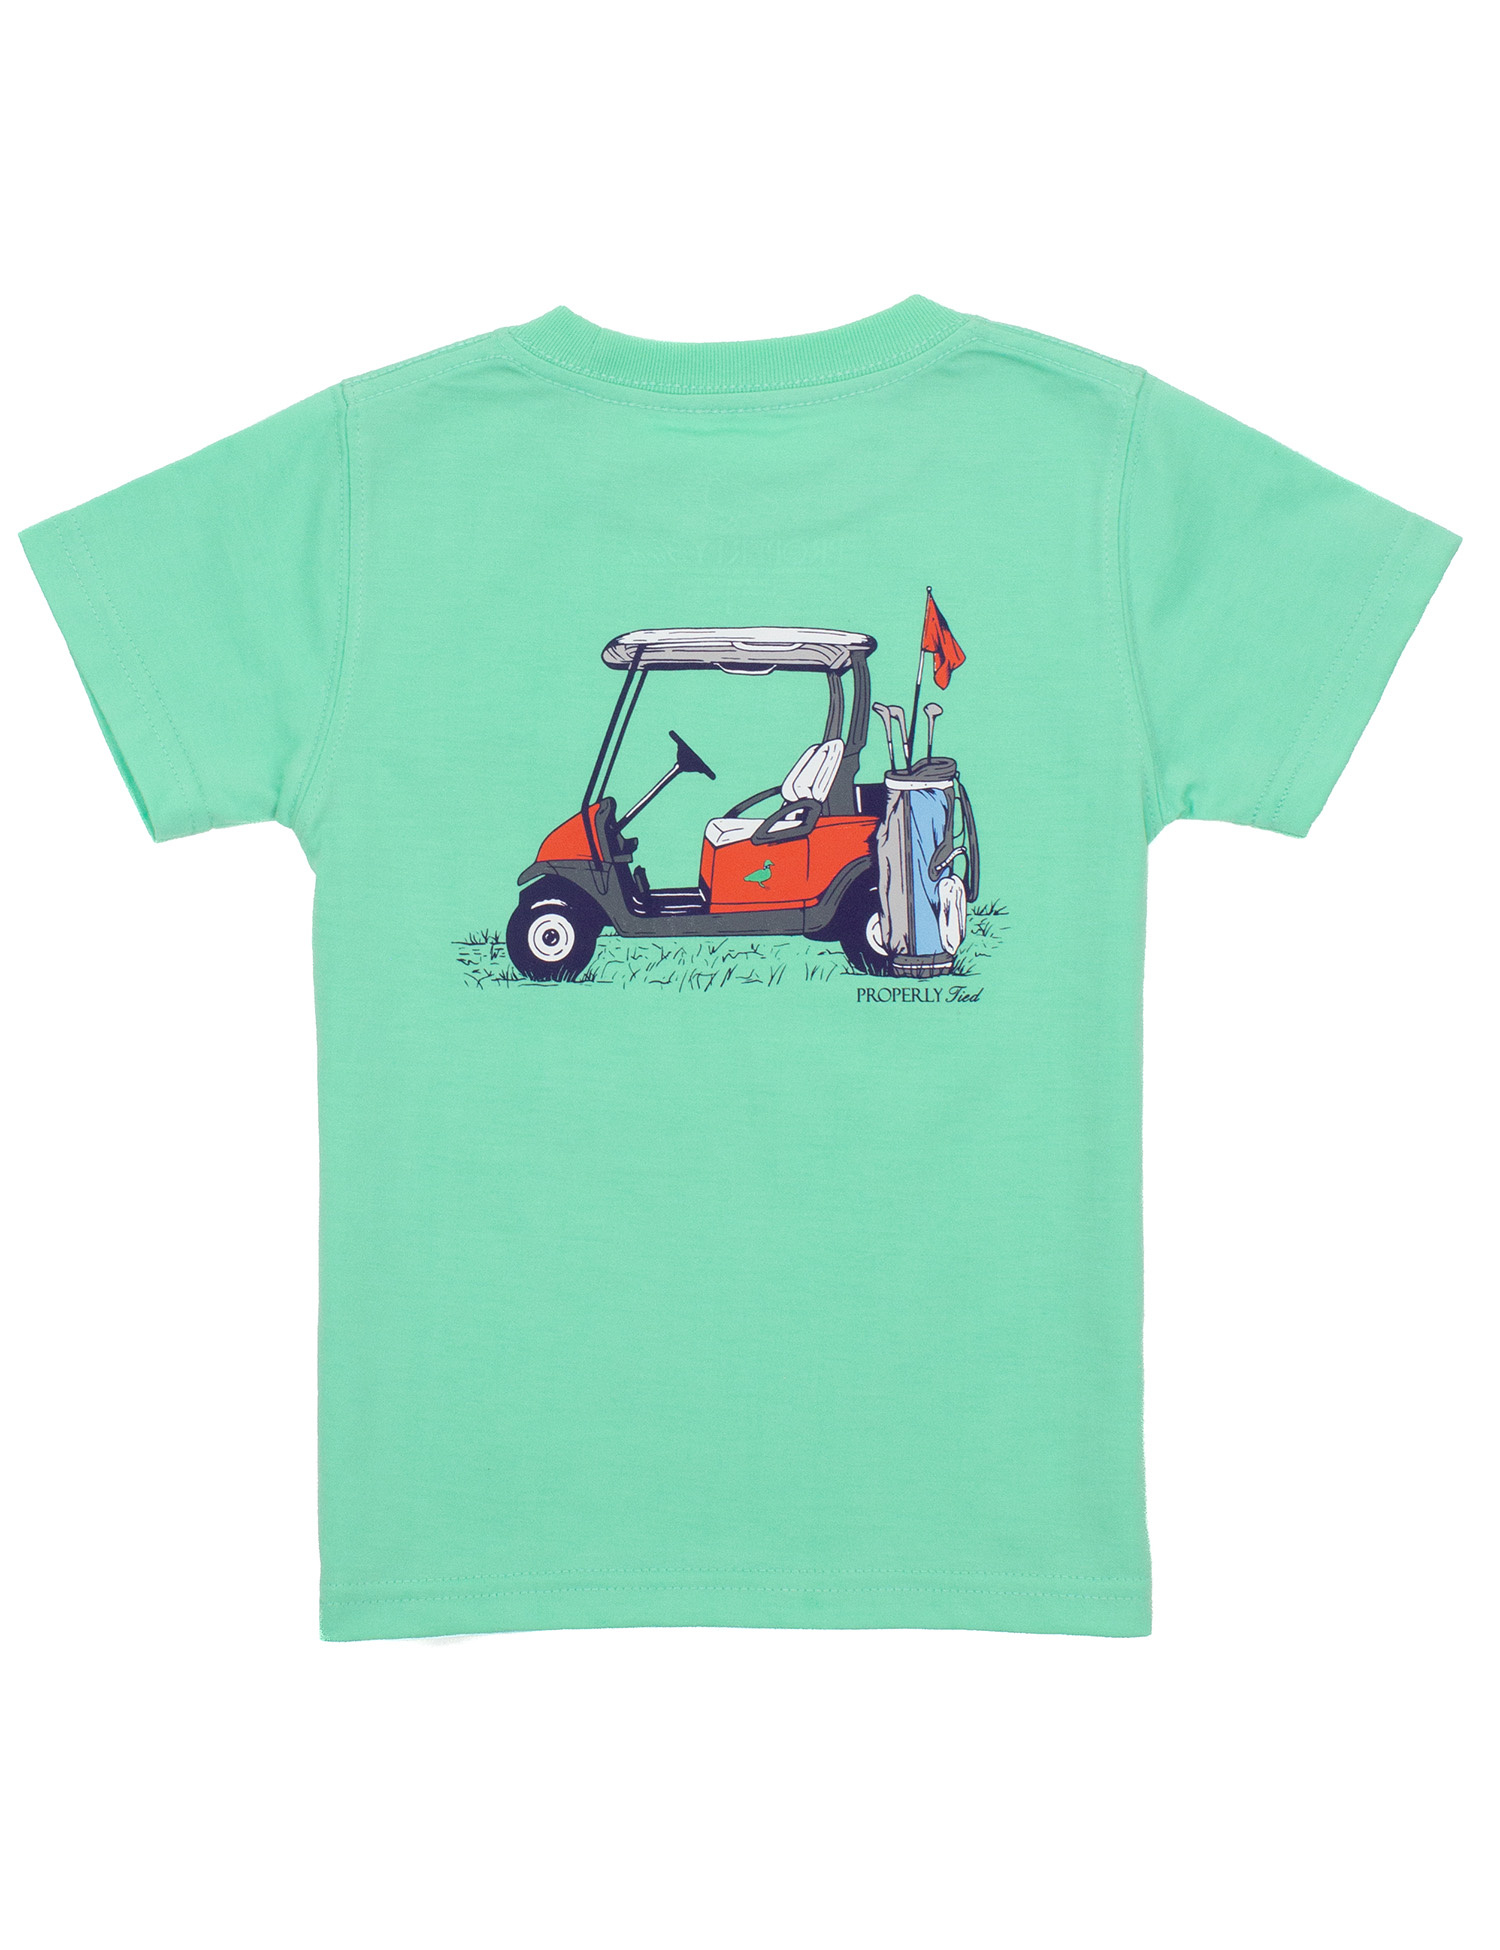 Properly Tied Boy S./S Graphic T-Shirt